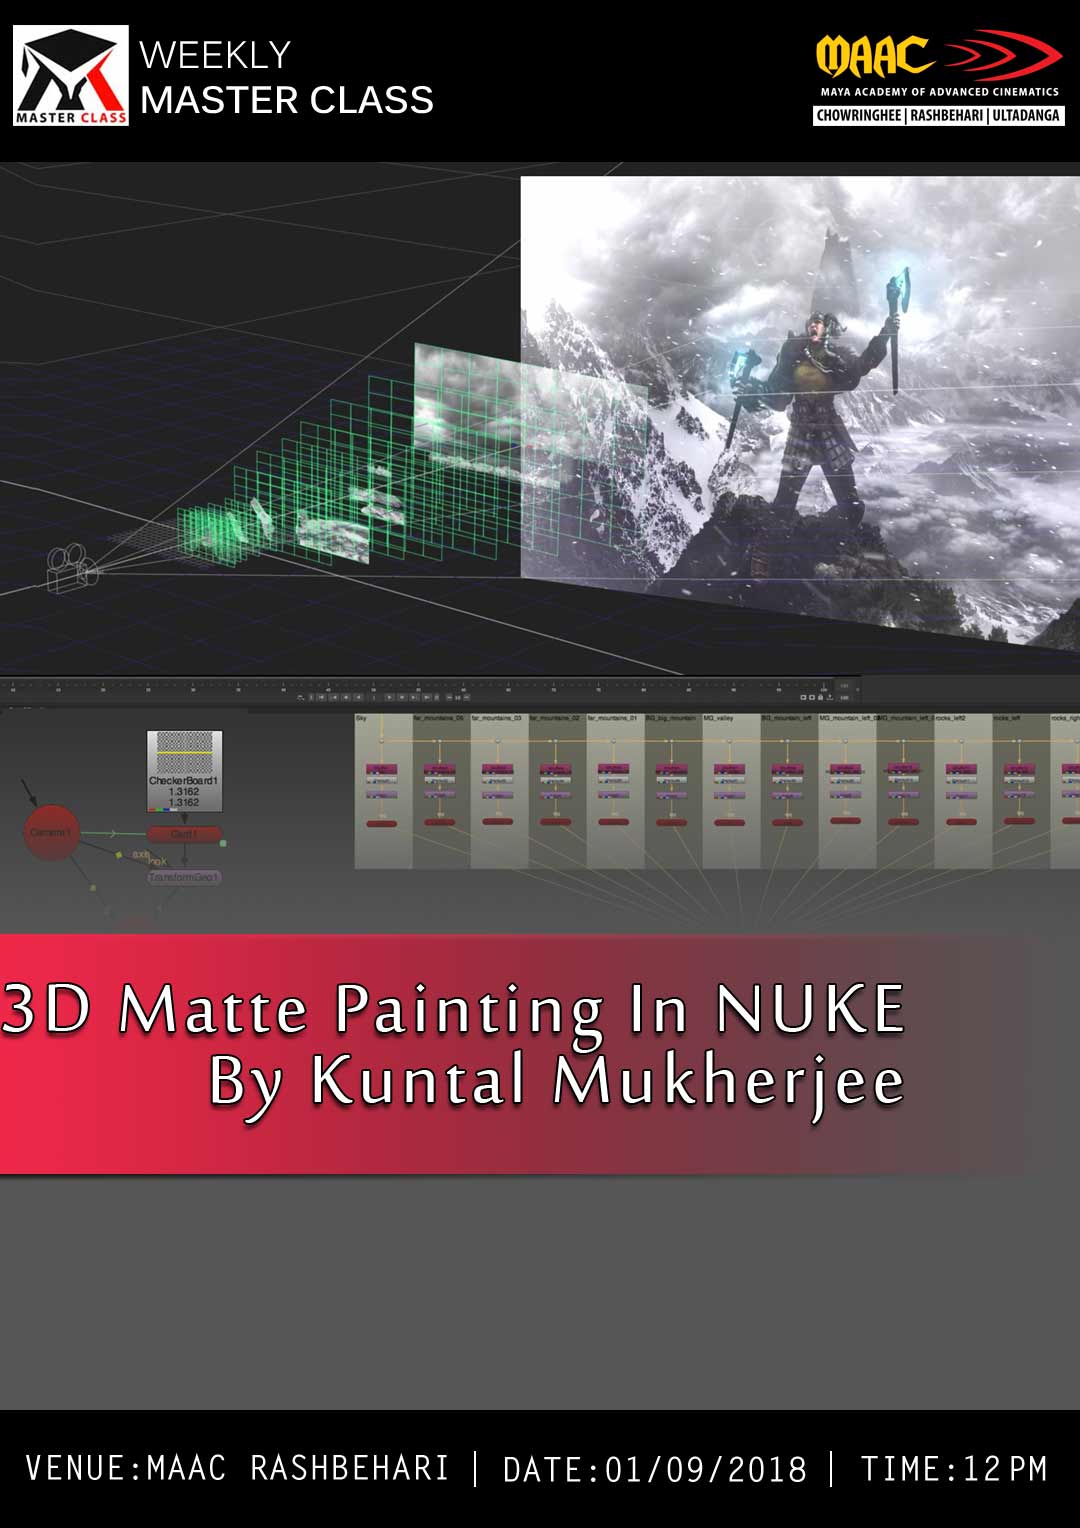 Weekly Master Class on 3D Matte Painting in Nuke